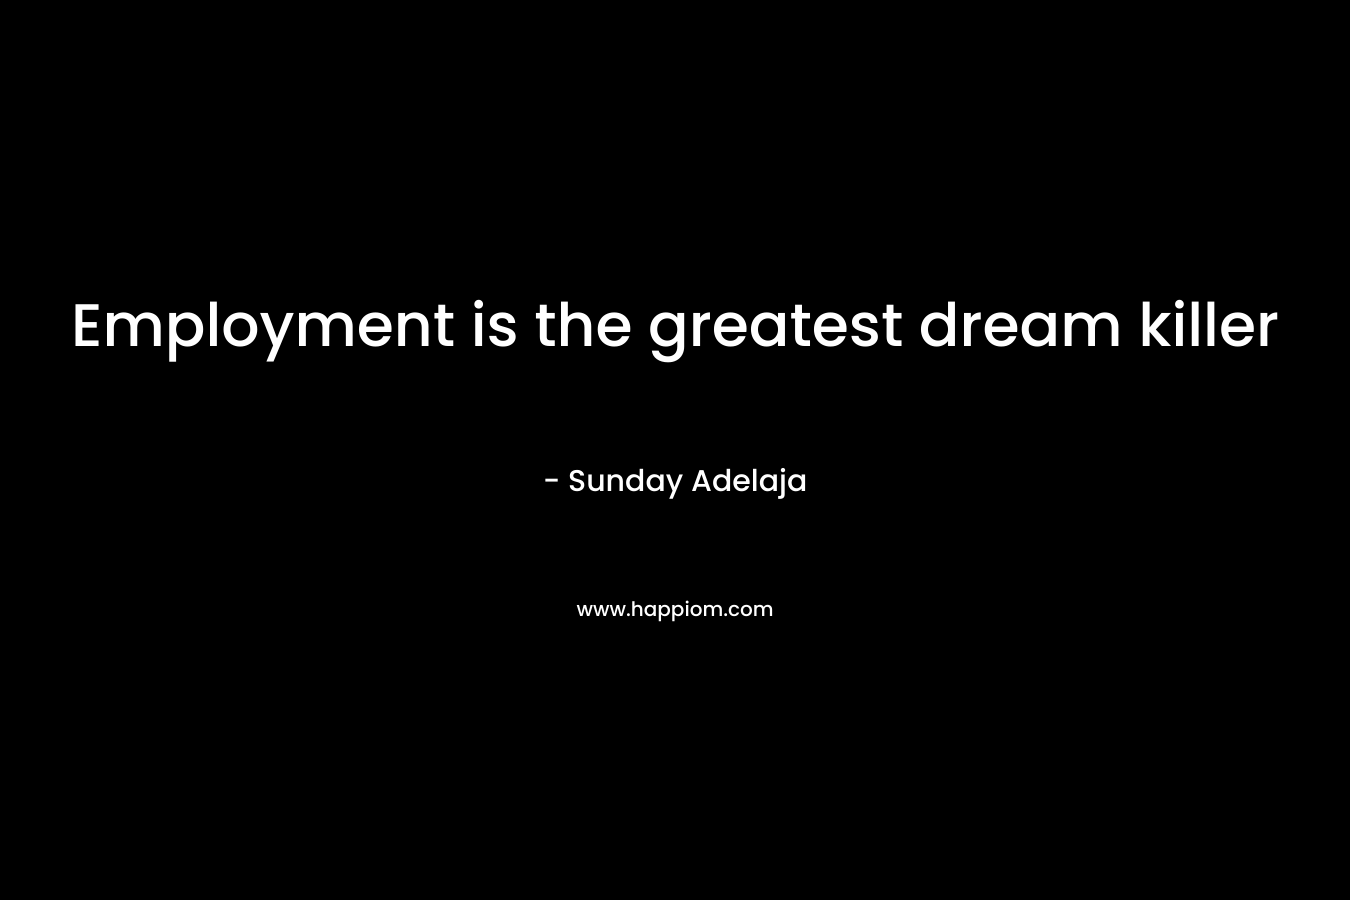 Employment is the greatest dream killer